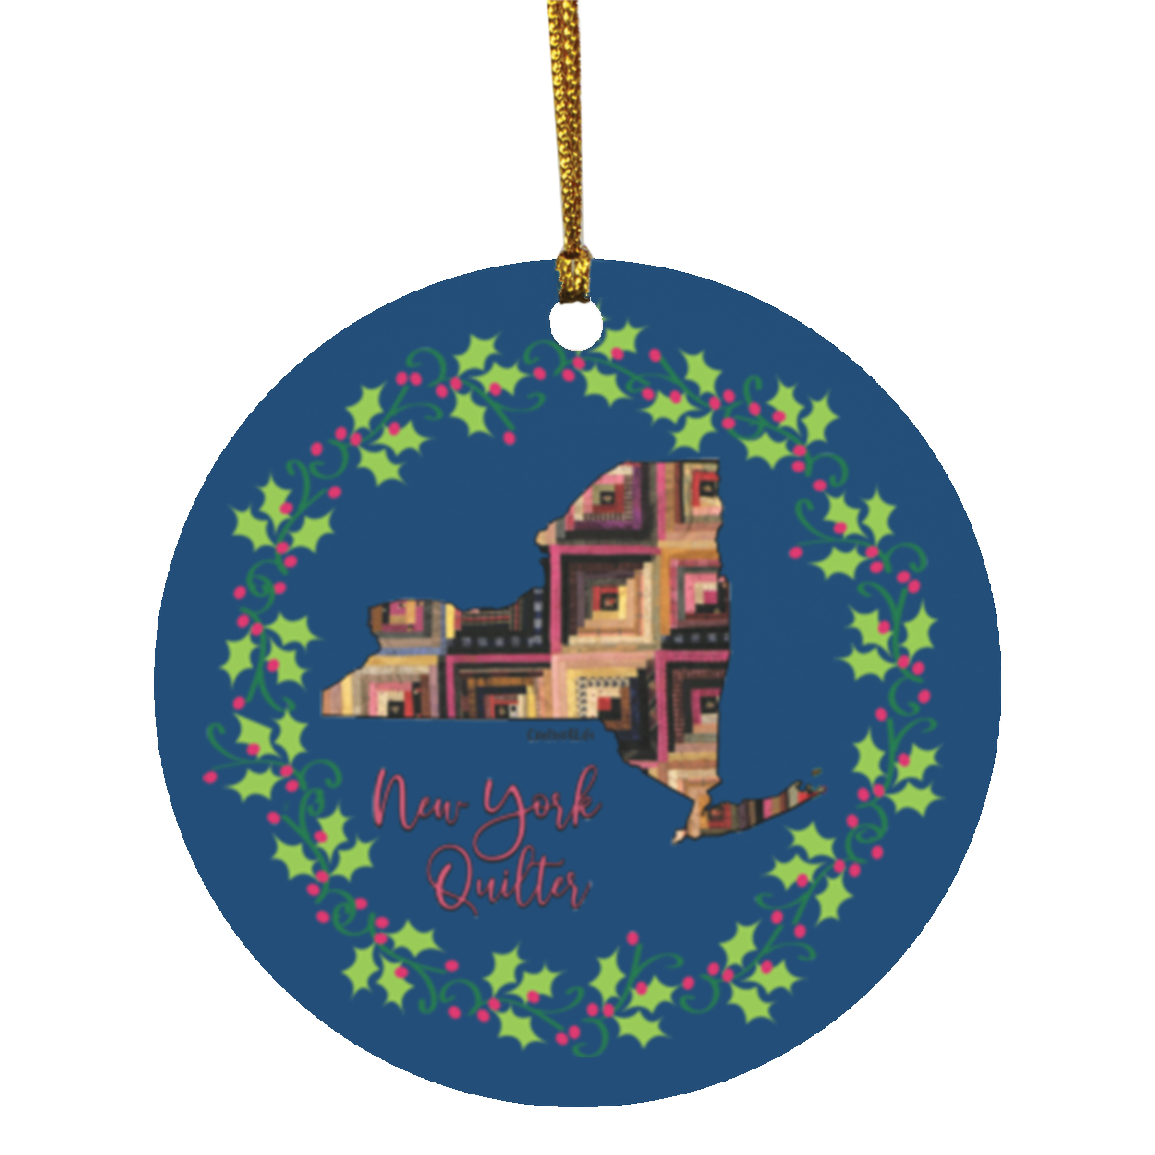 New York Quilter Christmas Circle Ornament